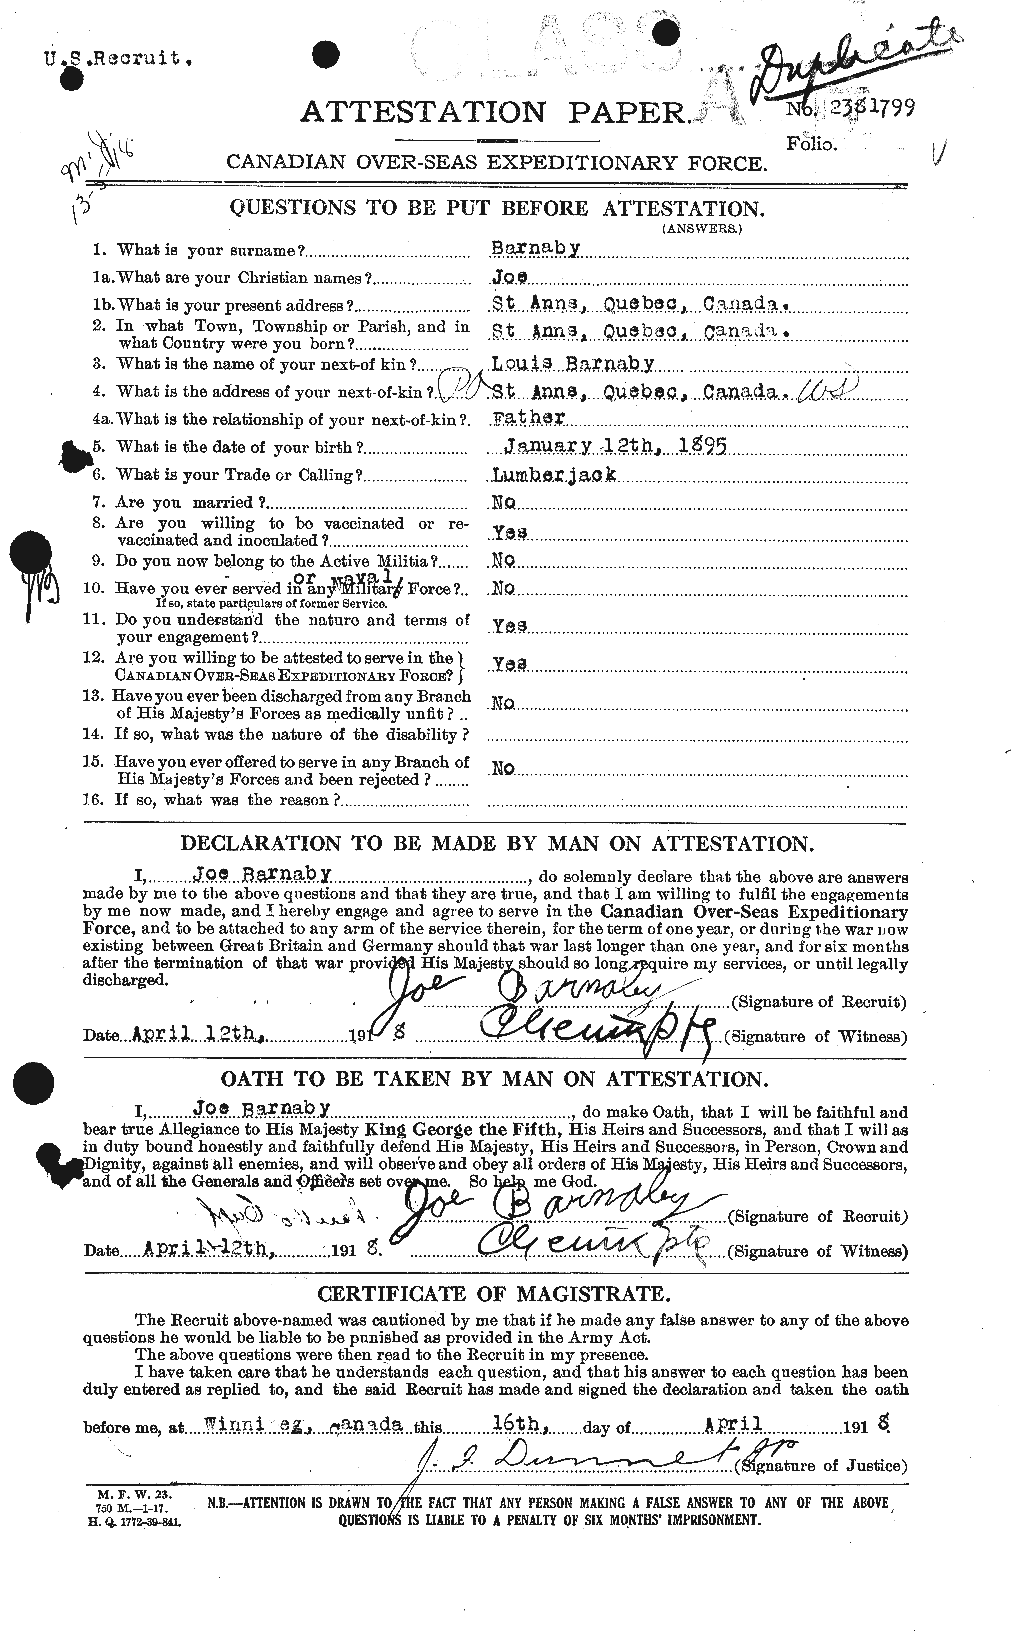 Personnel Records of the First World War - CEF 227054a